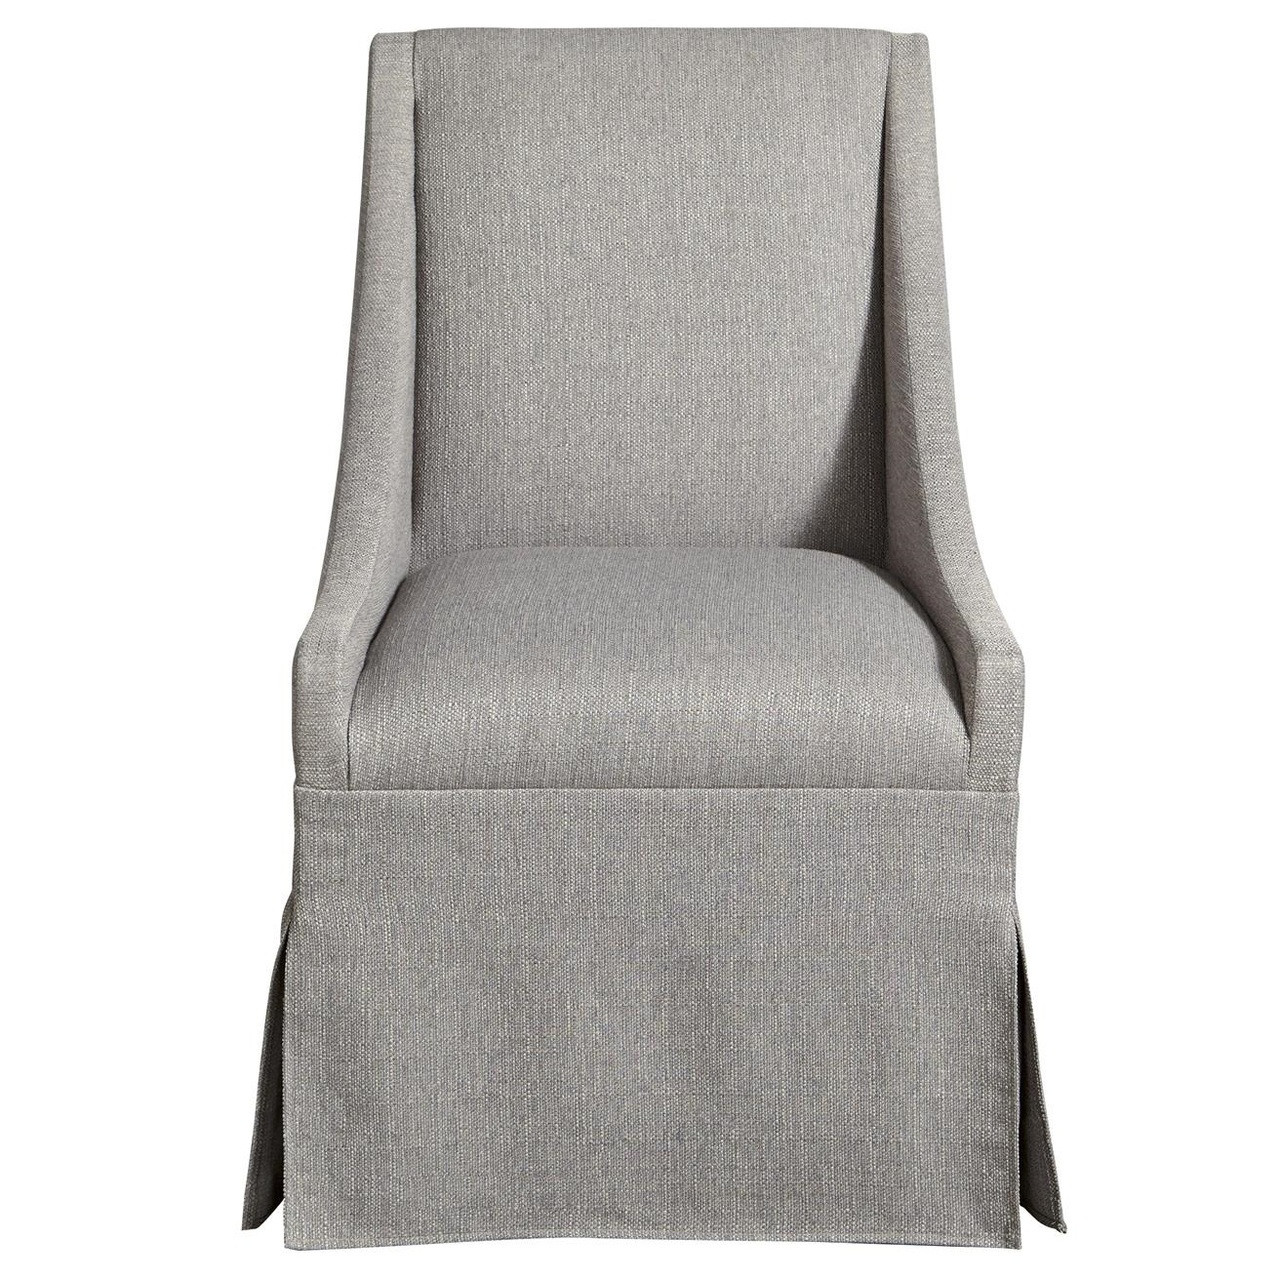 Townsend Modern Grey Upholstered Skirted Dining Chair Zin Home